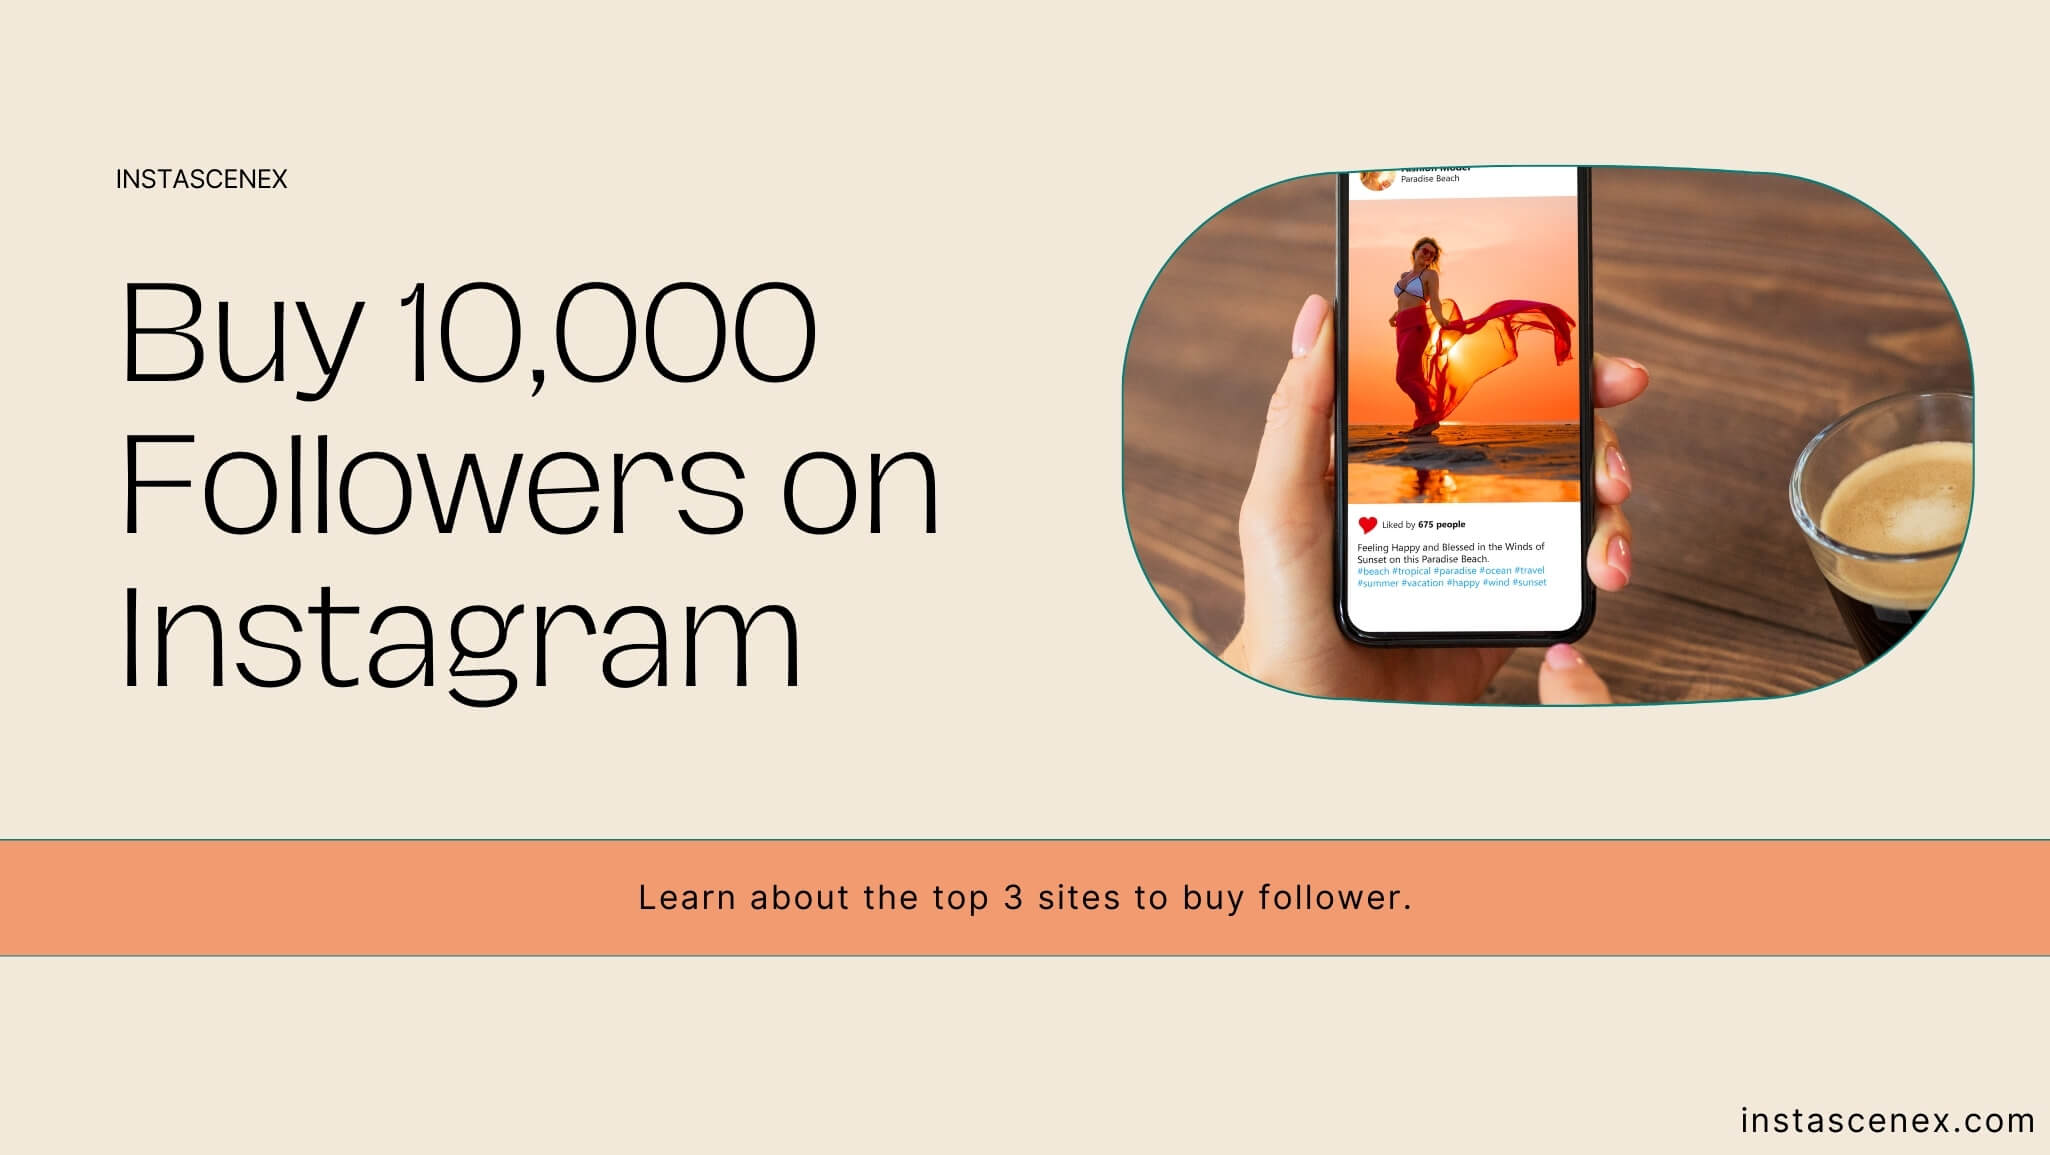 3 Best Sites to Buy 10000 Followers on Instagram